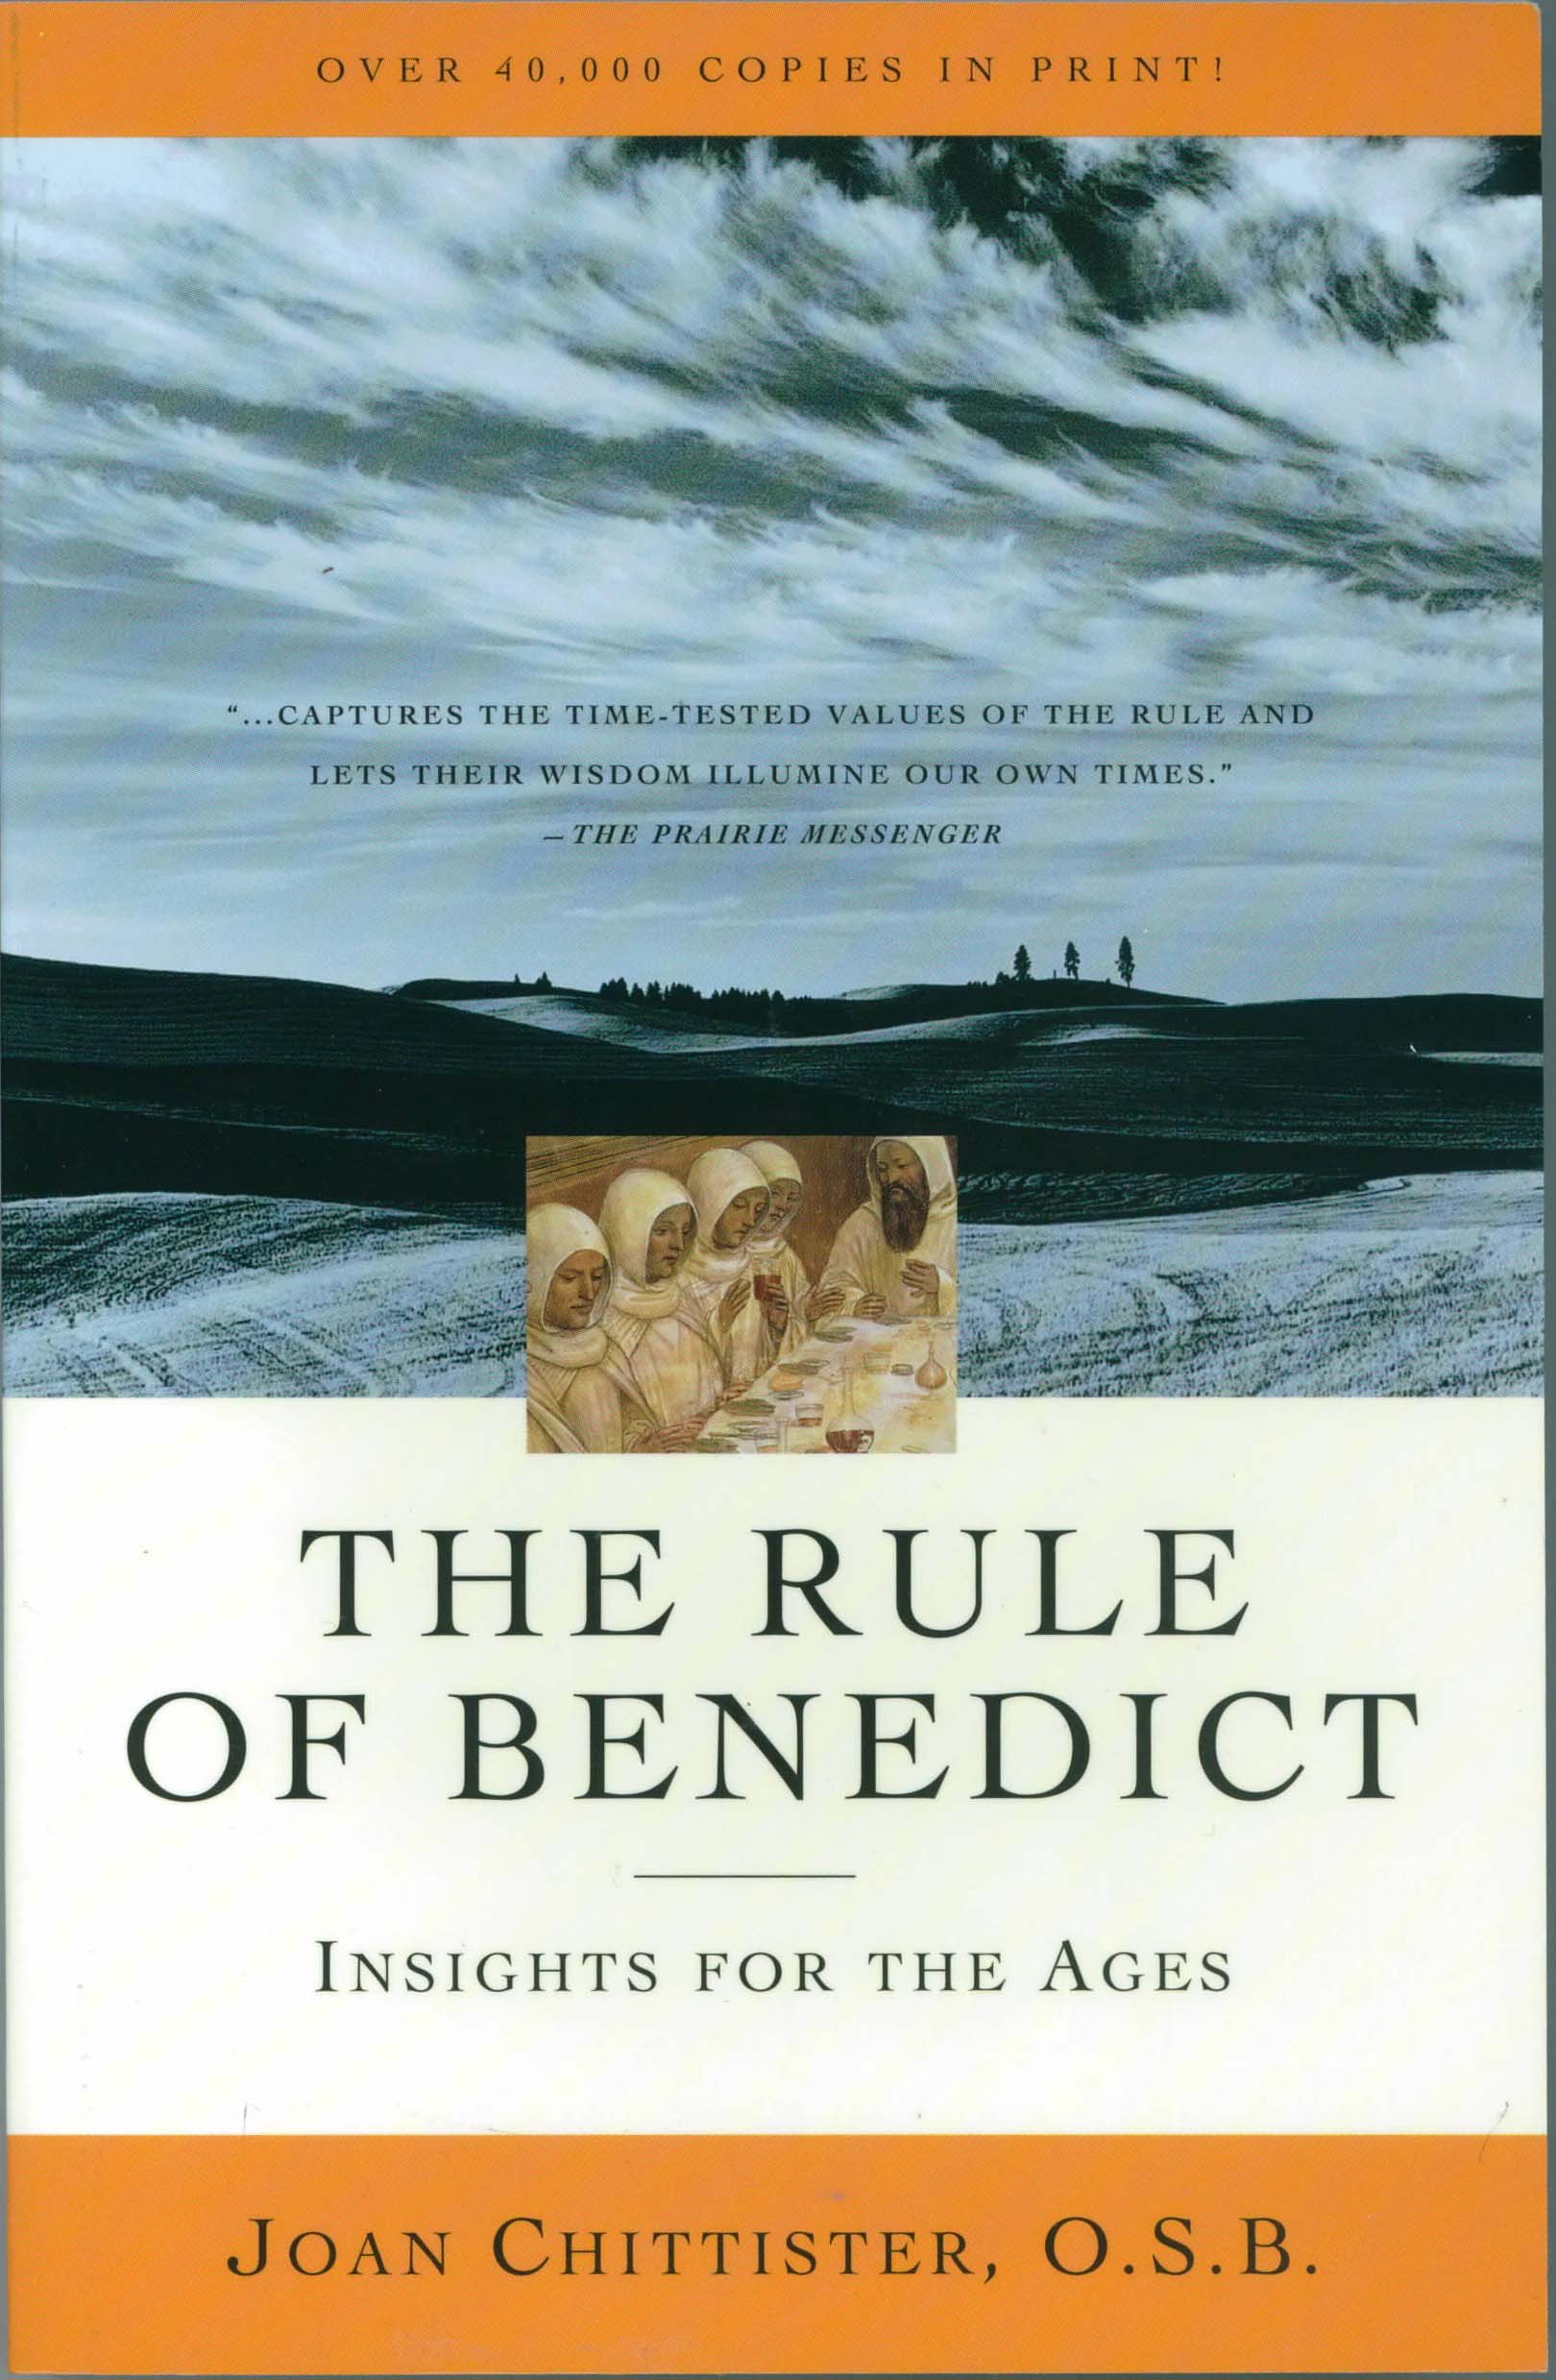 The Rule of Benedict: A Spirituality for the 21st Century  by Joan Chittister, O.S.B. 108-9780824525941